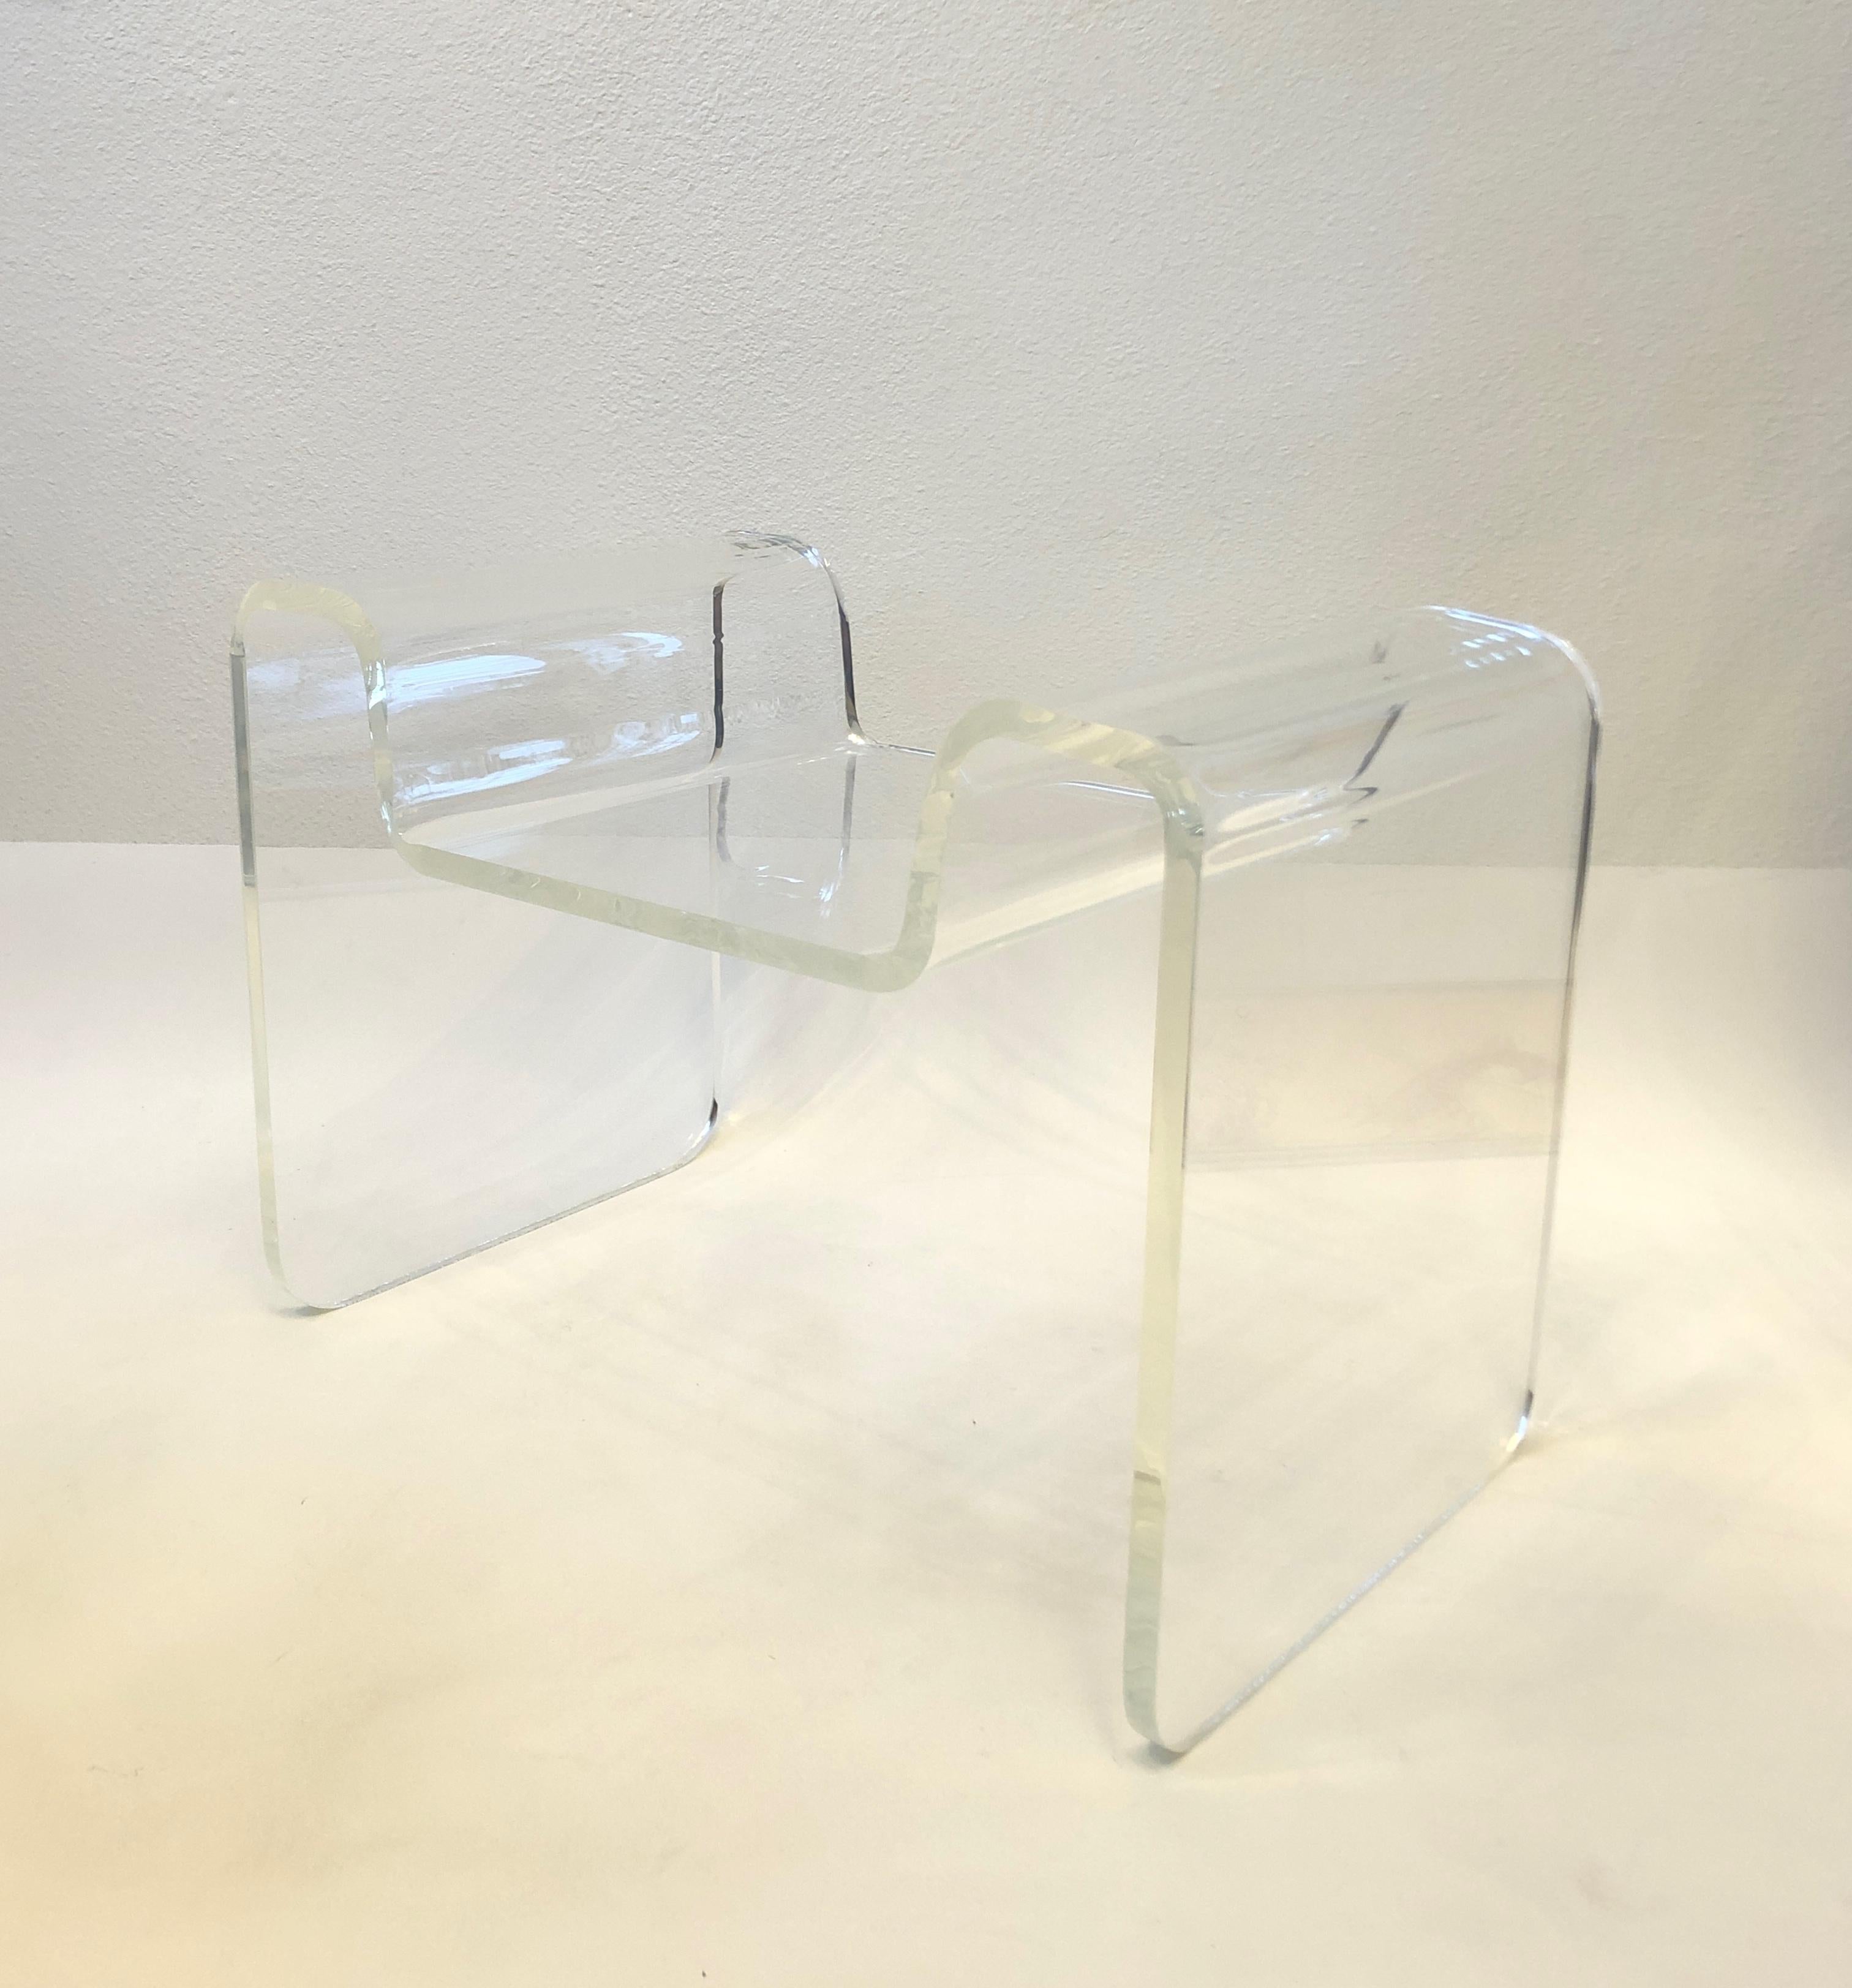 1970’s Sculptural clear acrylic bench by Karl Springer.
Constructed of one piece of acrylic that’s molded in to shape. 
Newly professionally polished.
Measurements: 28” Wide, 16” Deep, 19” High, 14.25” Seat.